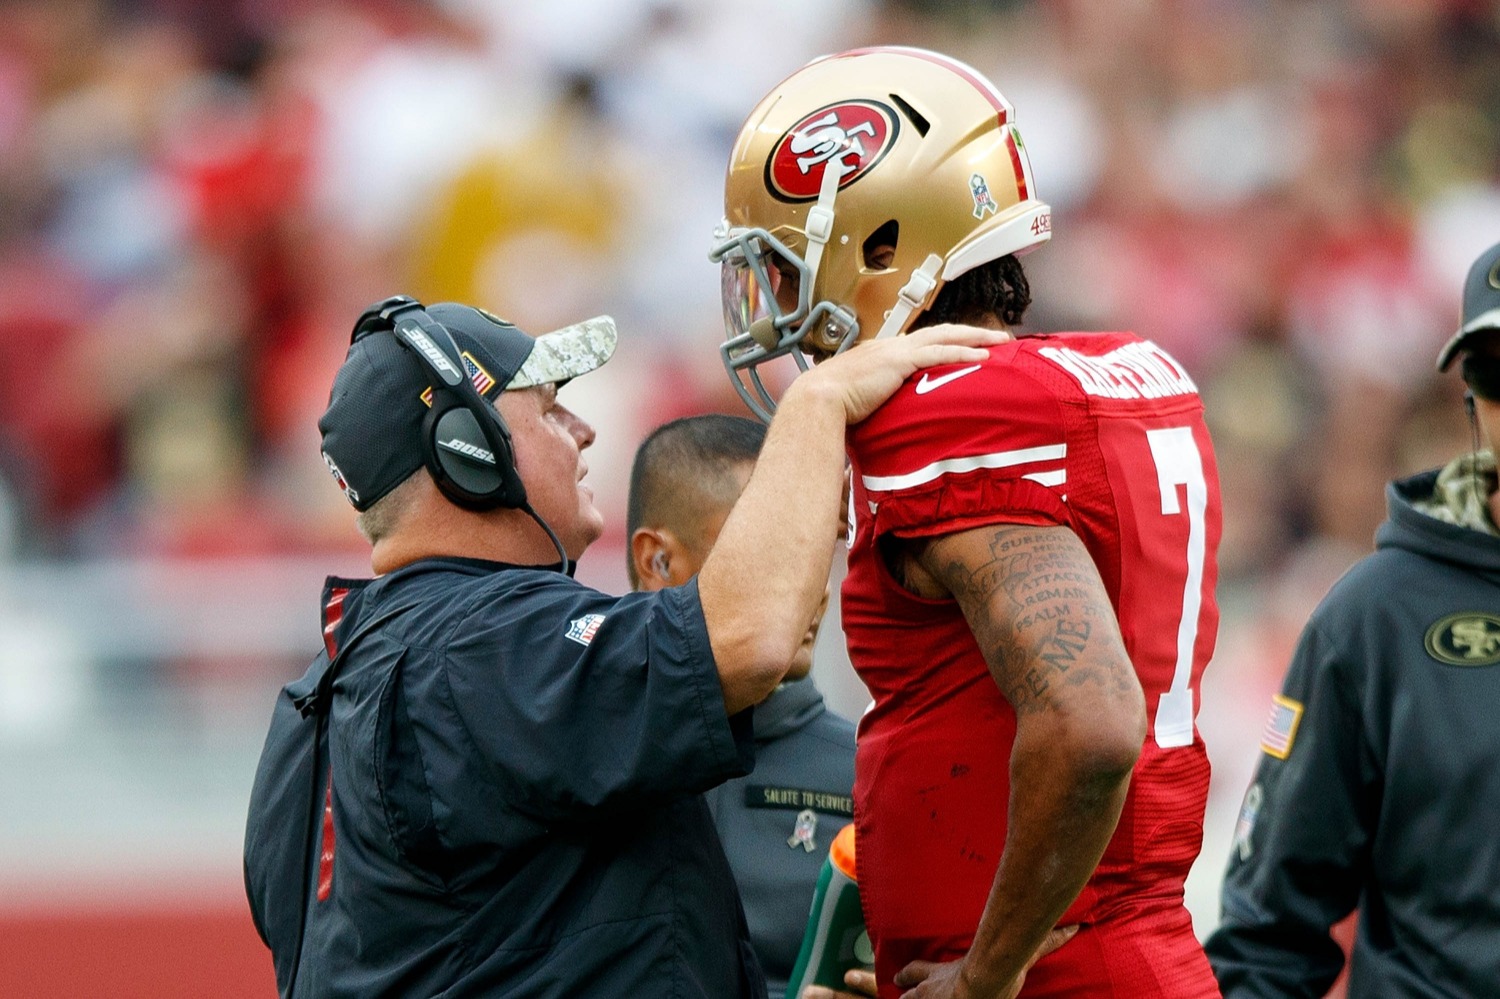 Chip Kelly supported Colin Kaepernick after the 49ers QB took a knee during the national anthem in 2016.